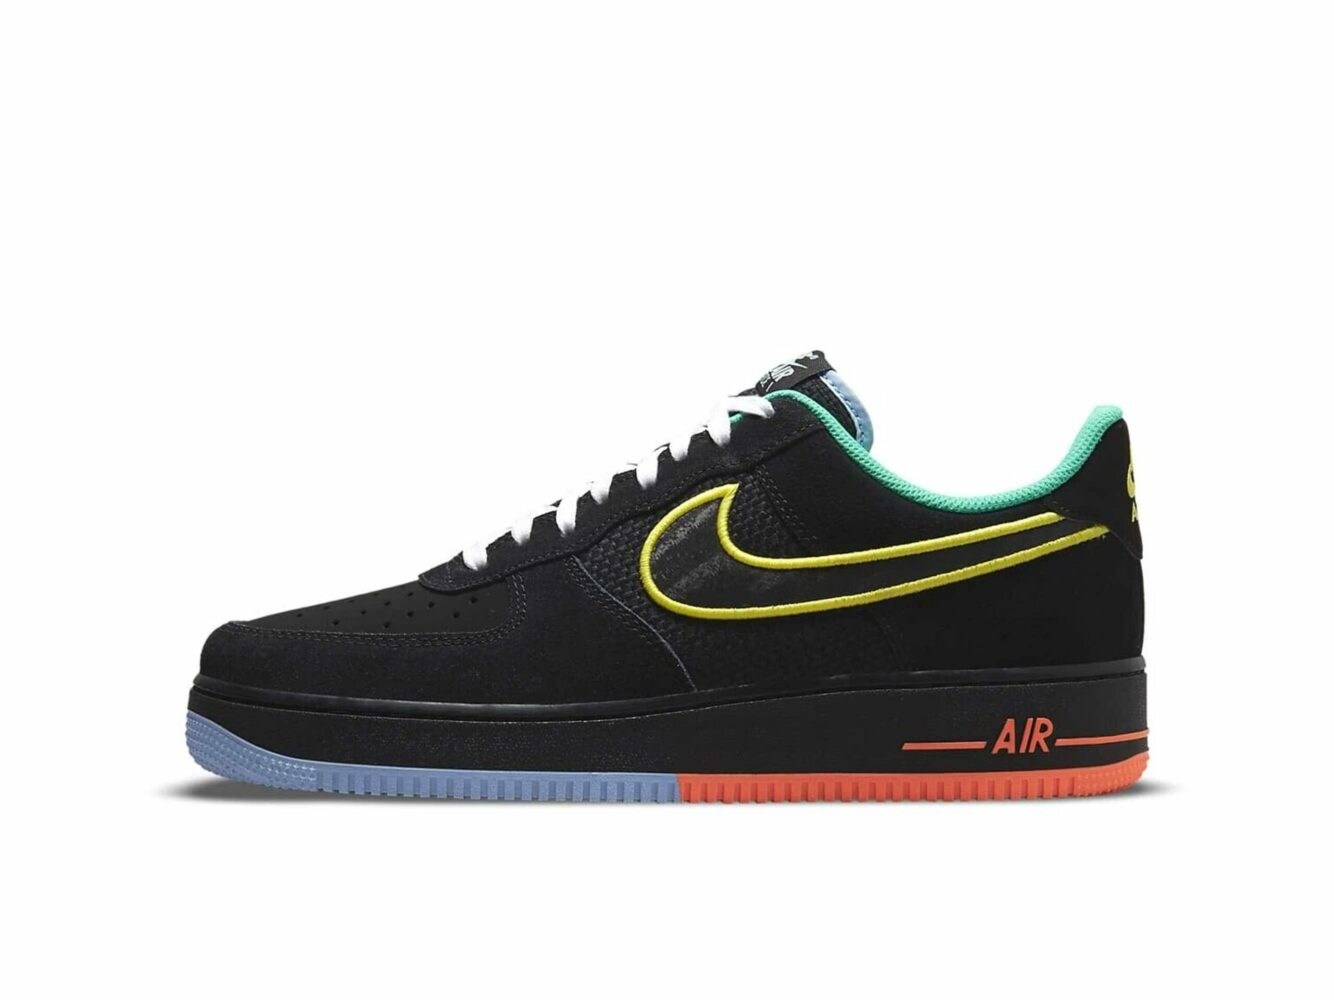 nike air force 1 low peace and unity black green red blue DM9051_001 купить